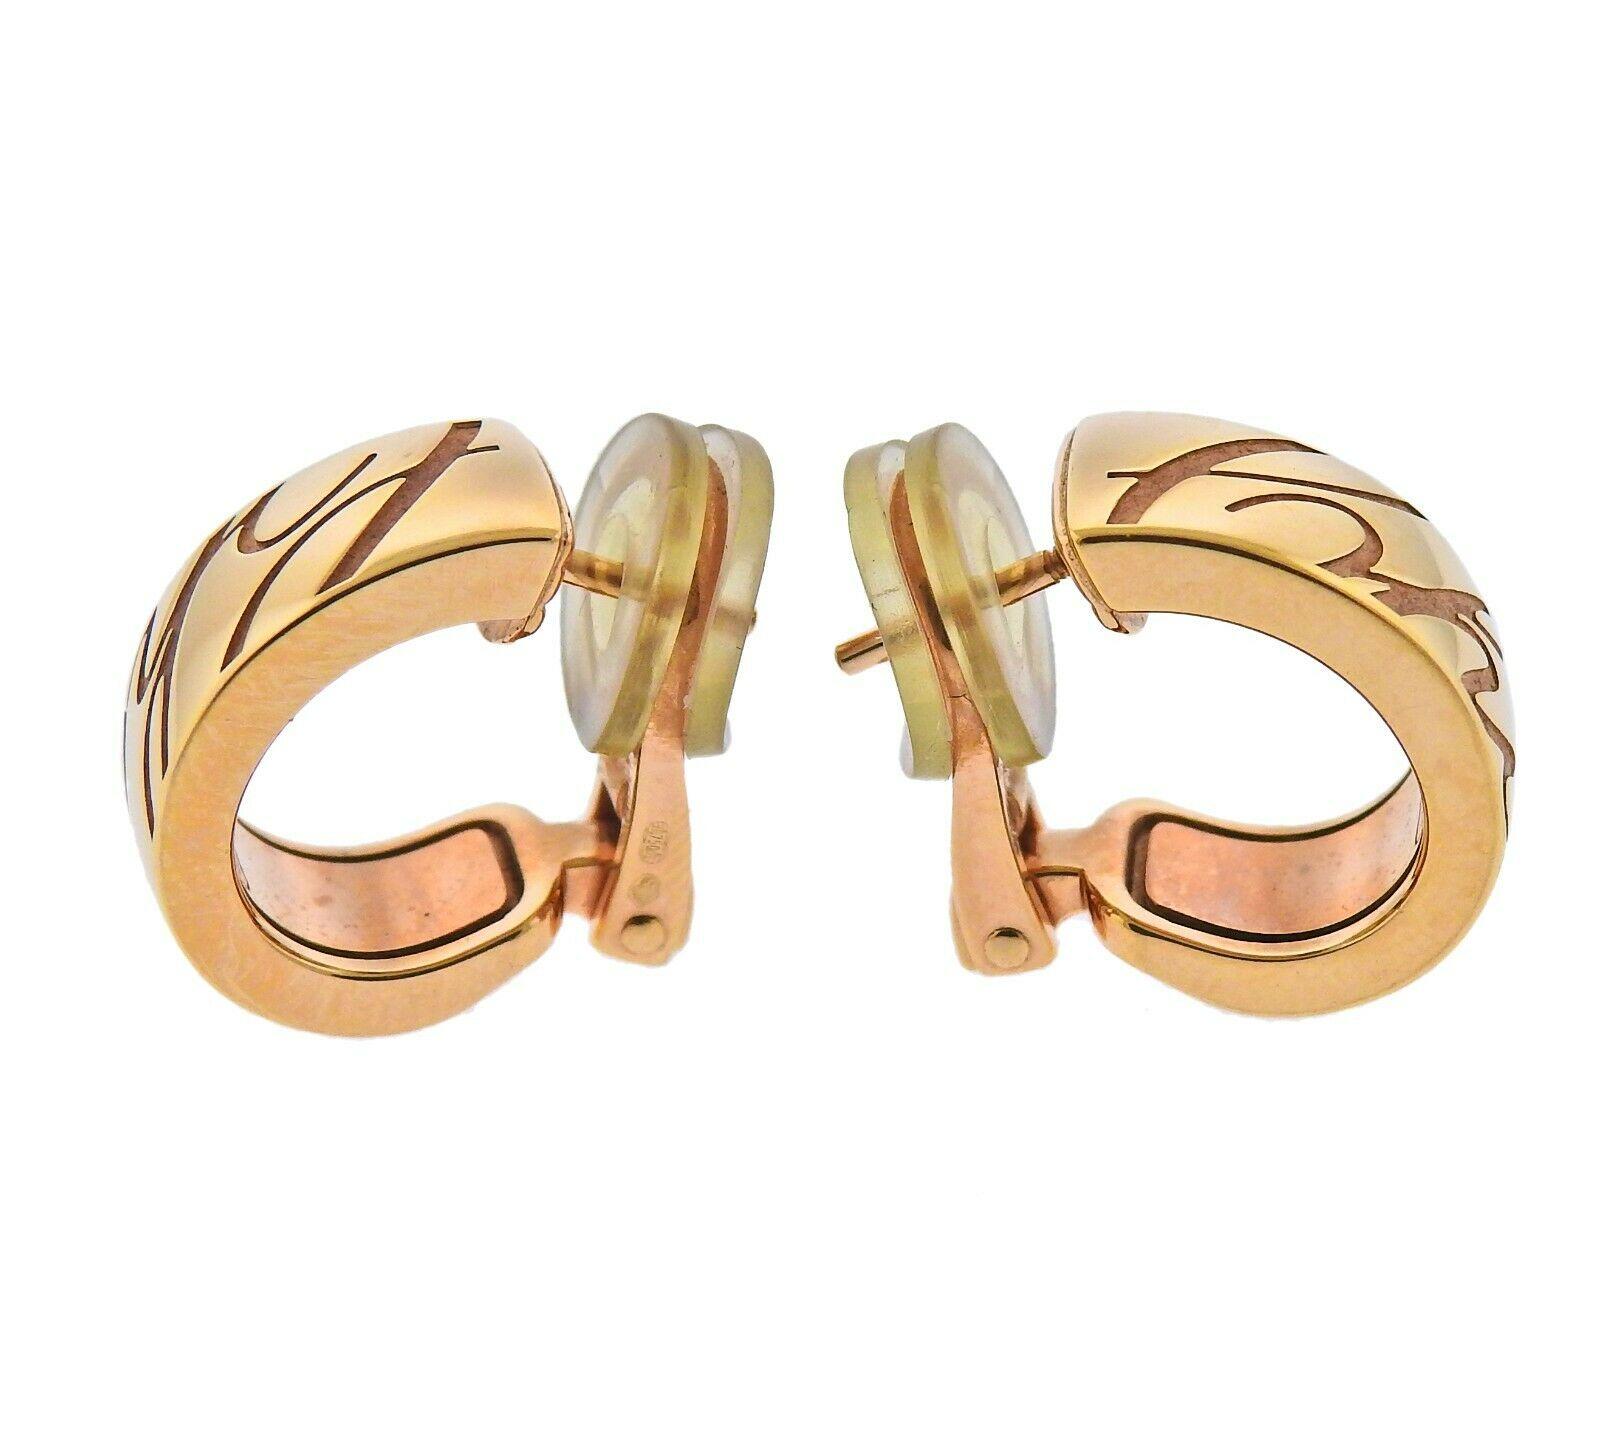 Pair of new 18k rose gold Chopardissimo hoop earrings by Chopard. Retail $2950, come with a box. Earrings are 15mm x 7.5mm Weight - 11.8 grams. Marked: Au750, Chopard, 837031.